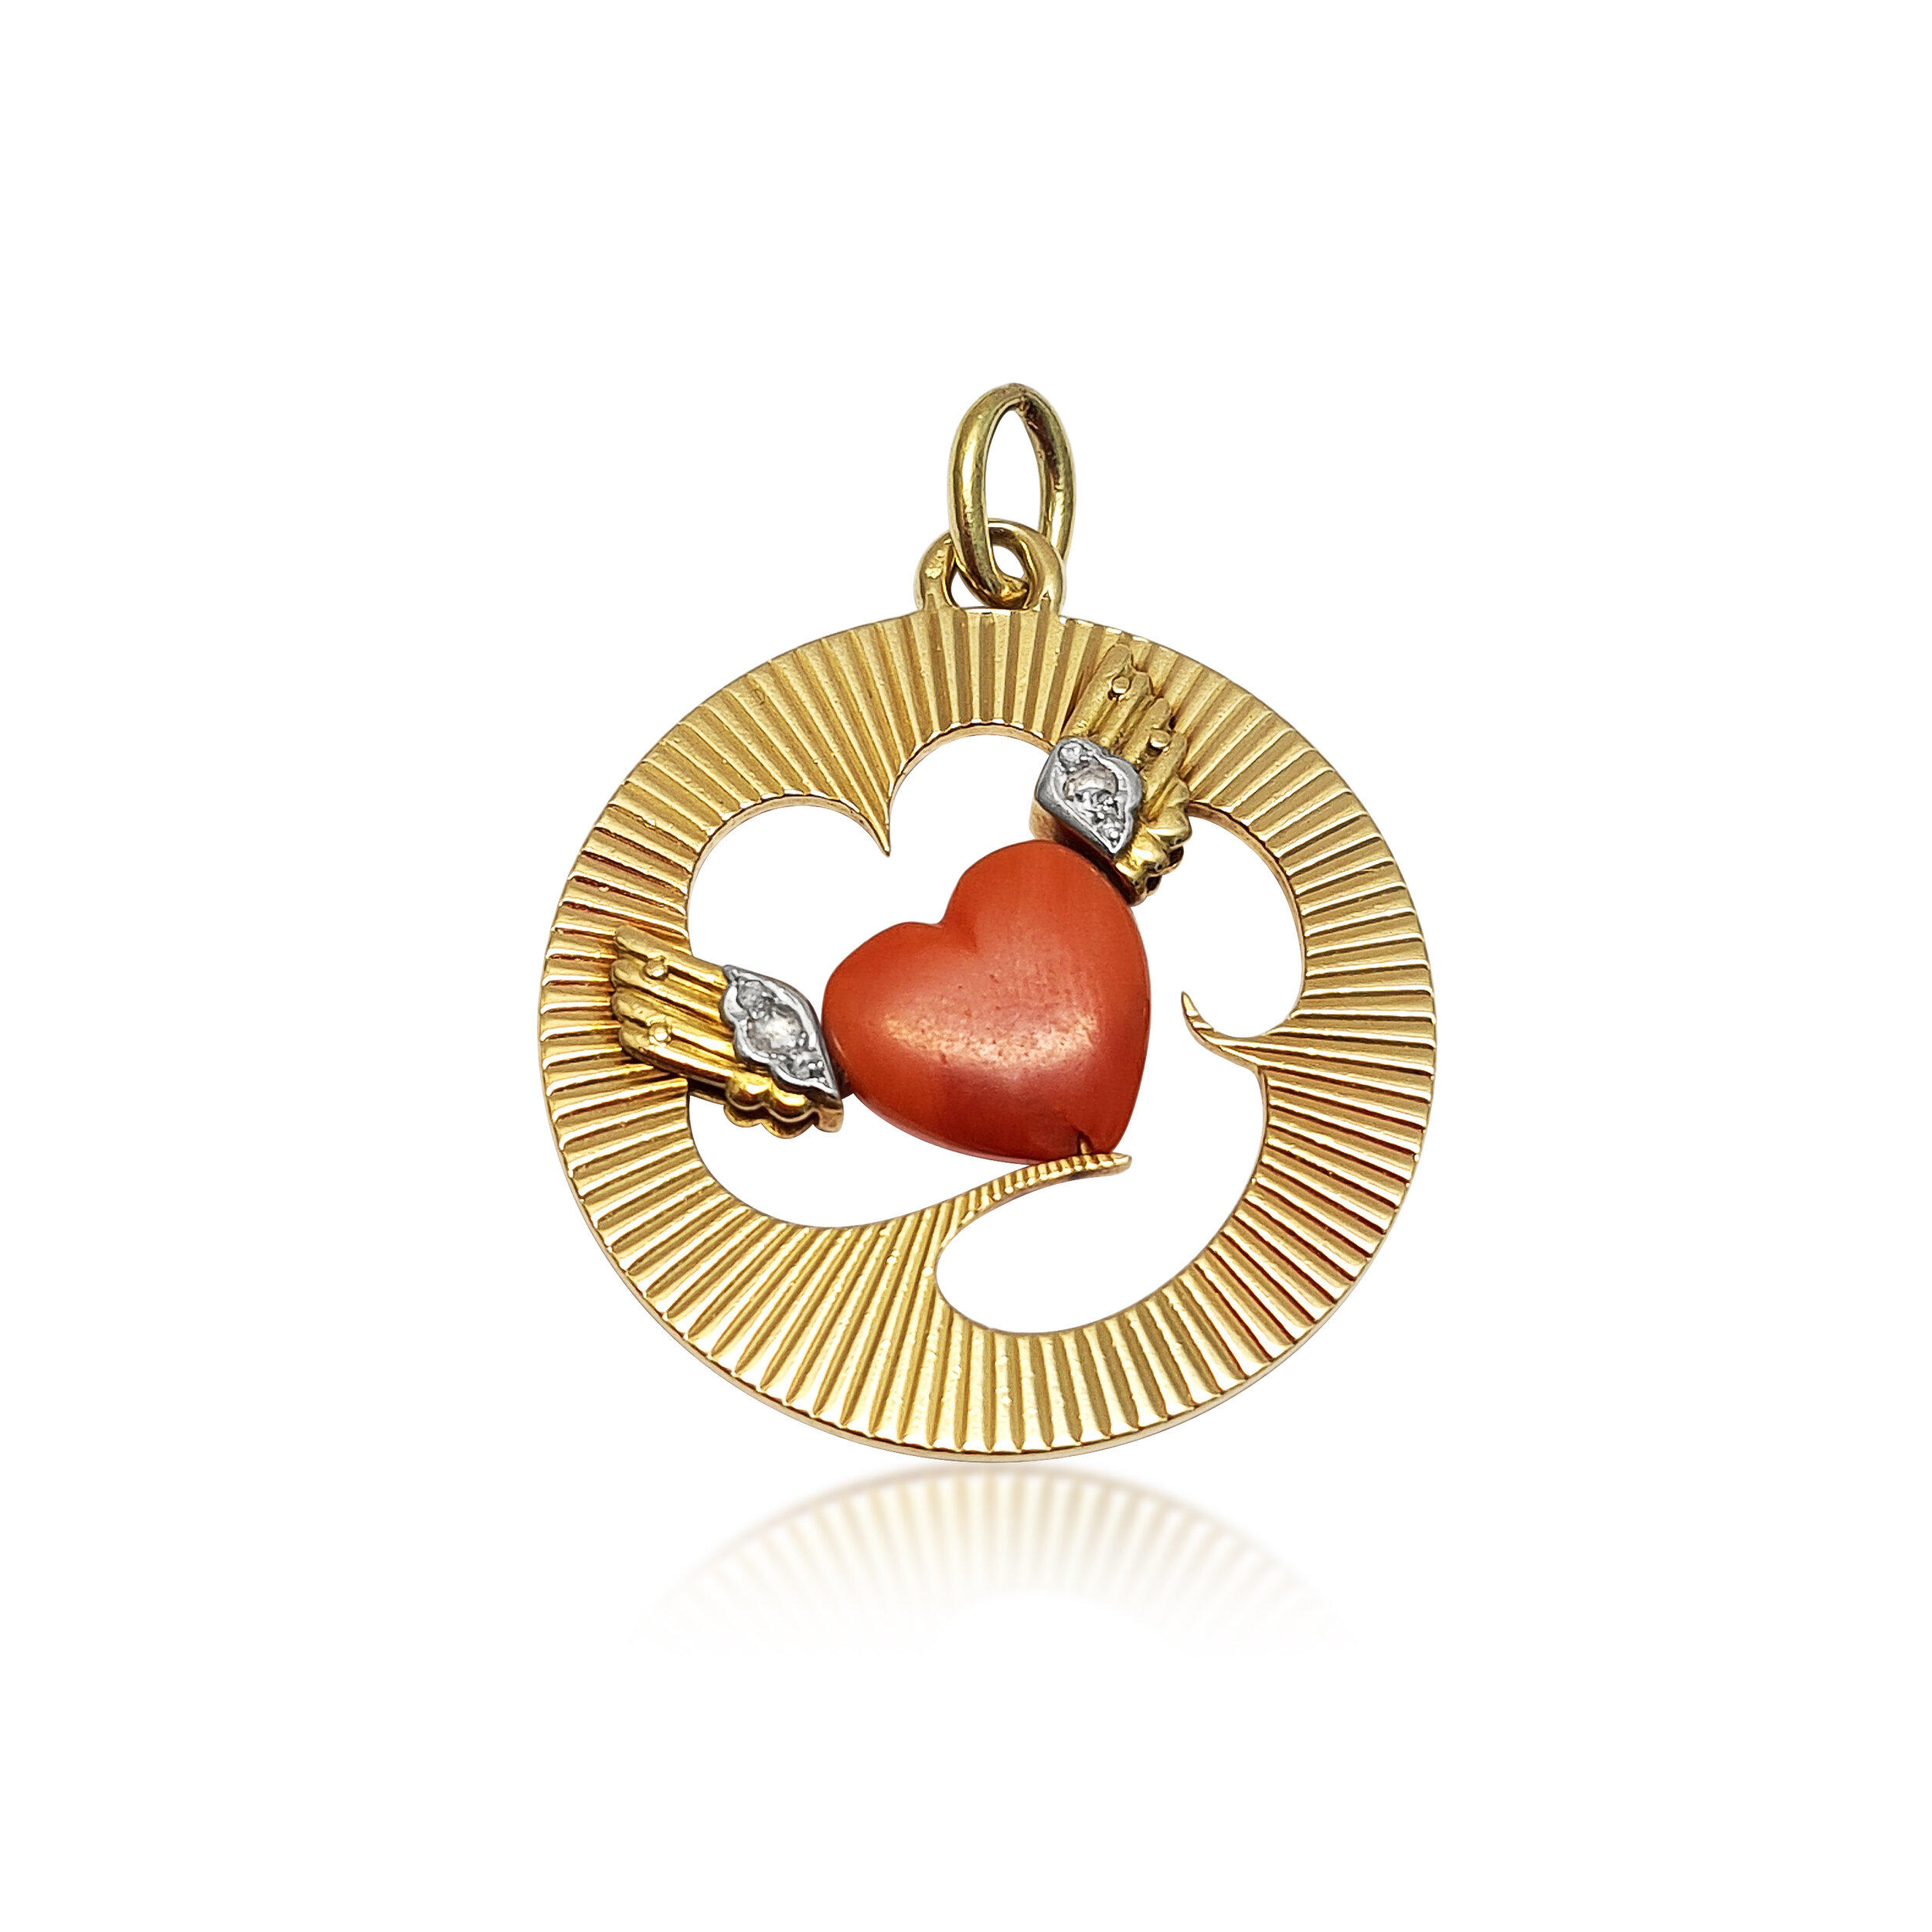 An 18K Yellow Gold Coral Heart and Diamond Pendant Charm, by